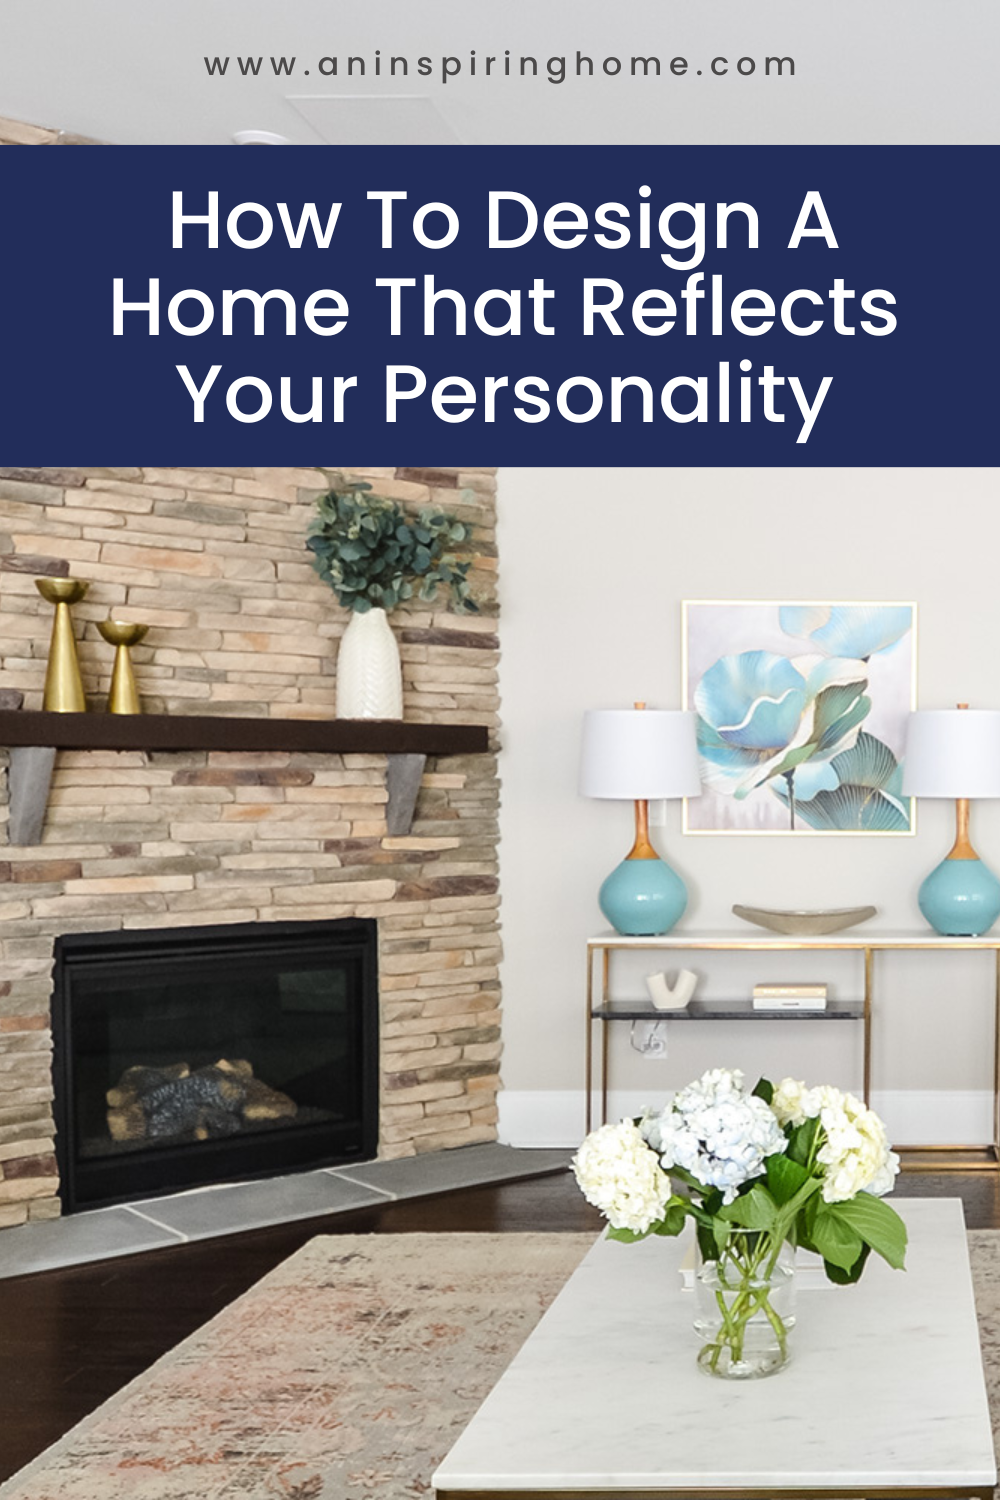 How To Design A Home That Reflects Your Personality